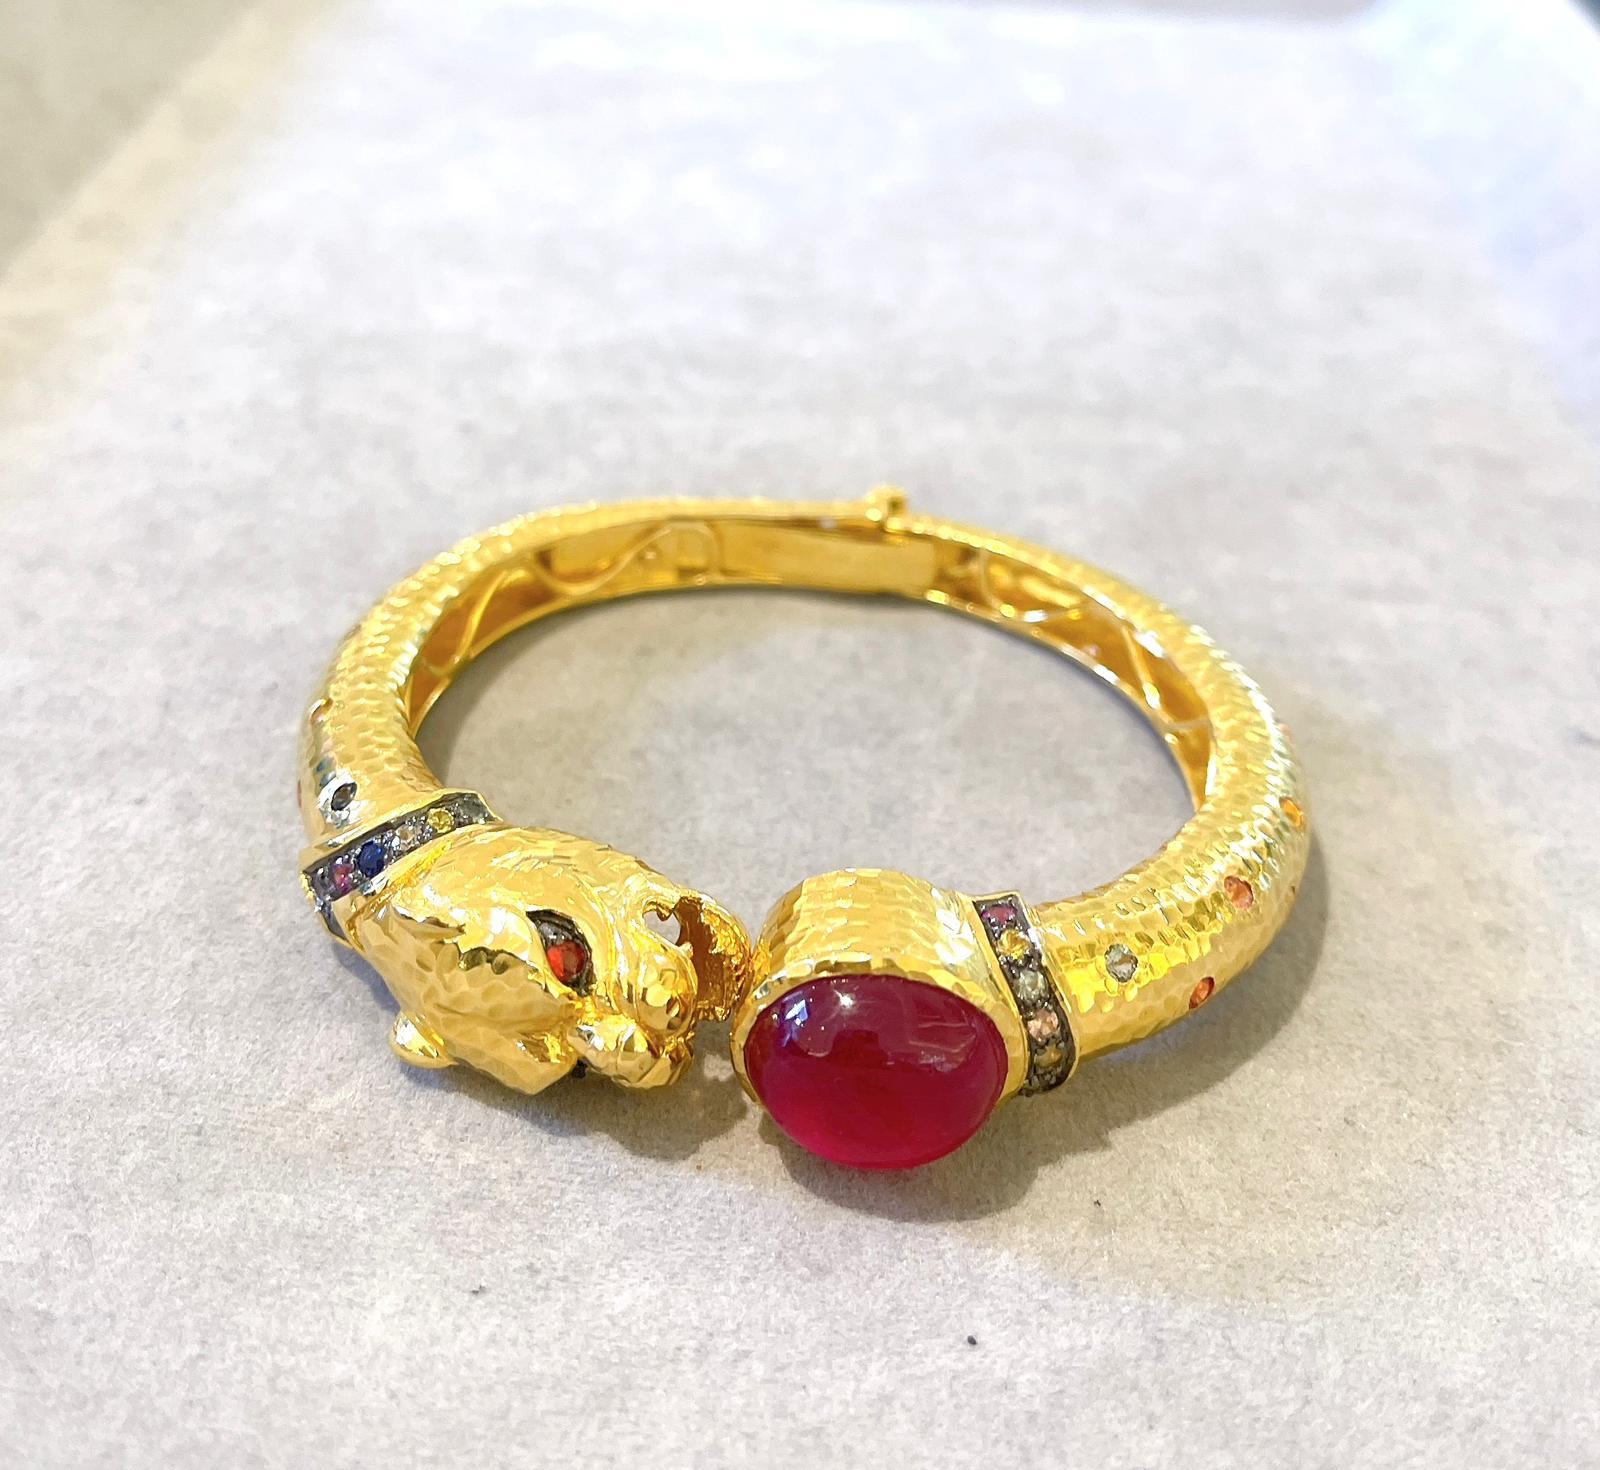 Bochic “Orient” Red Ruby & Multi Sapphire Dragon Bangle Set In 18K Gold & Silver

Red Ruby Oval Shape - 9 Carat 
Multi color sapphires from Sri Lanka 
1 Carat 
Colors: Pink, Orange, Blue, Rose, Yellow, Green 

The bangle has an open and close leaver